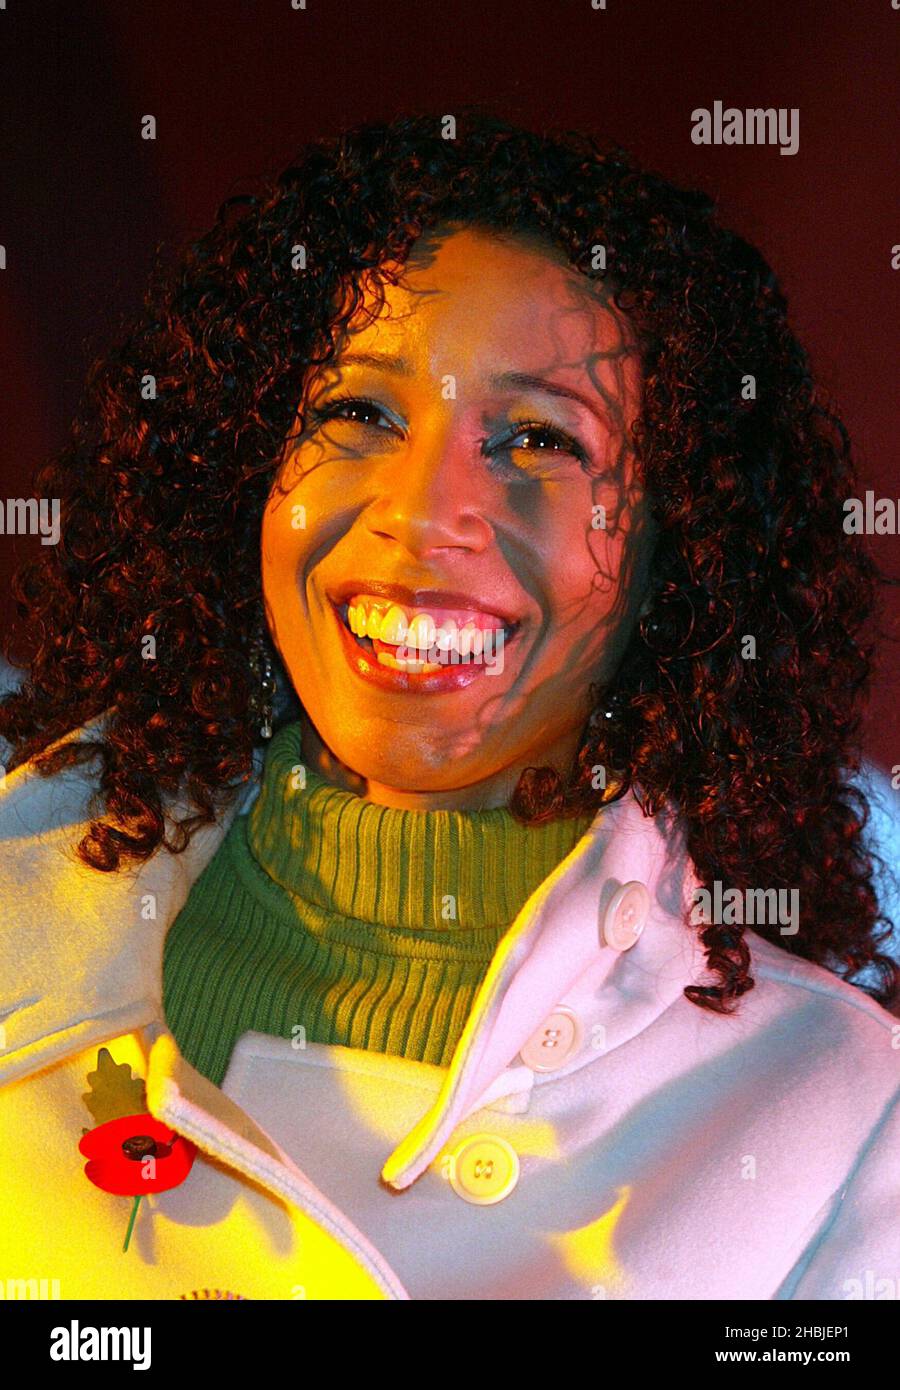 Margerita Taylor introduces Busted performing live on stage at the annual Regent Street Christmas Lights switching-on ceremony, having performed live, in Regent Street on November 7, 2004 in London. Head Shot Stock Photo